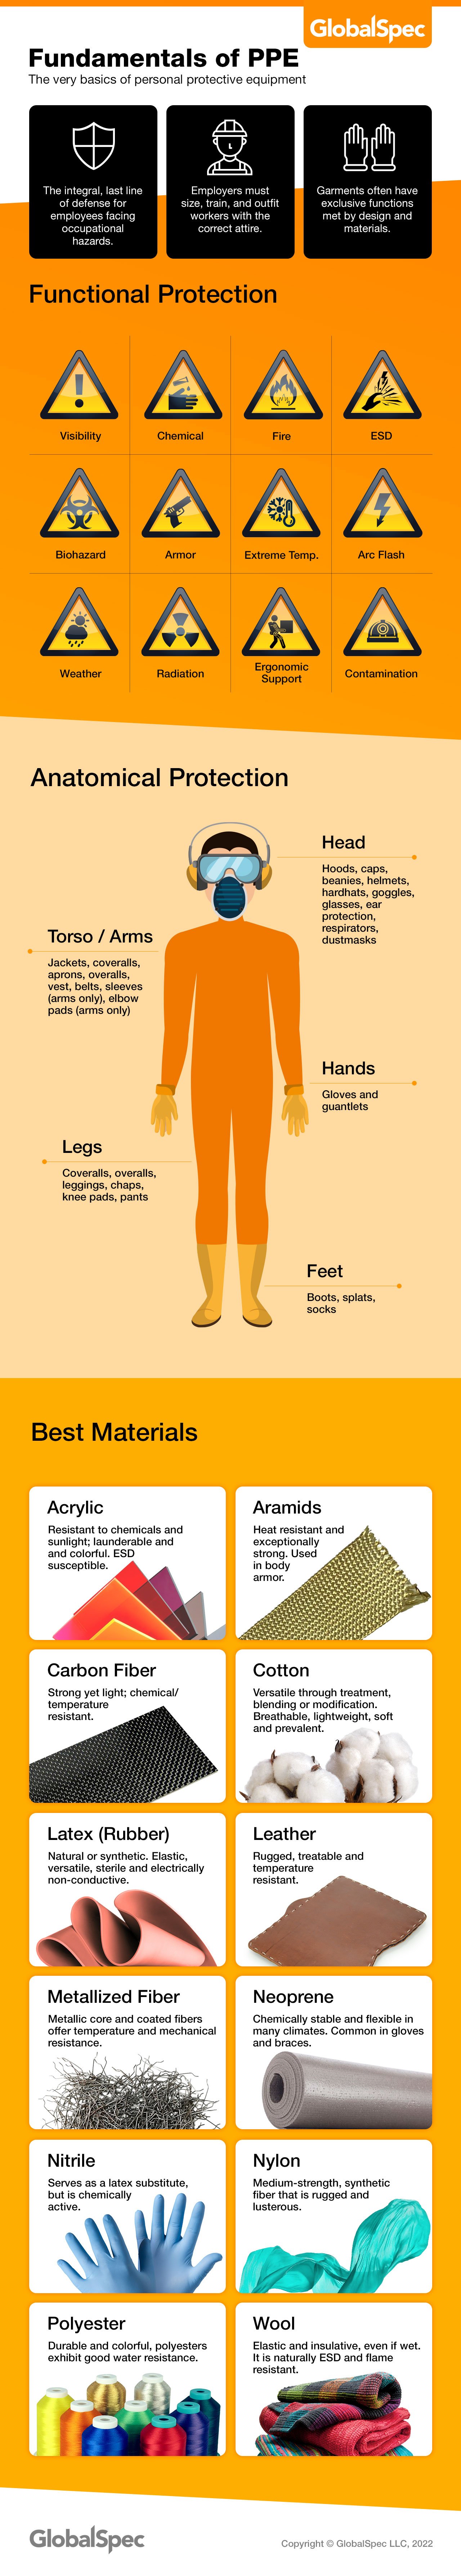 Personal protective equipment and safety clothing infographic